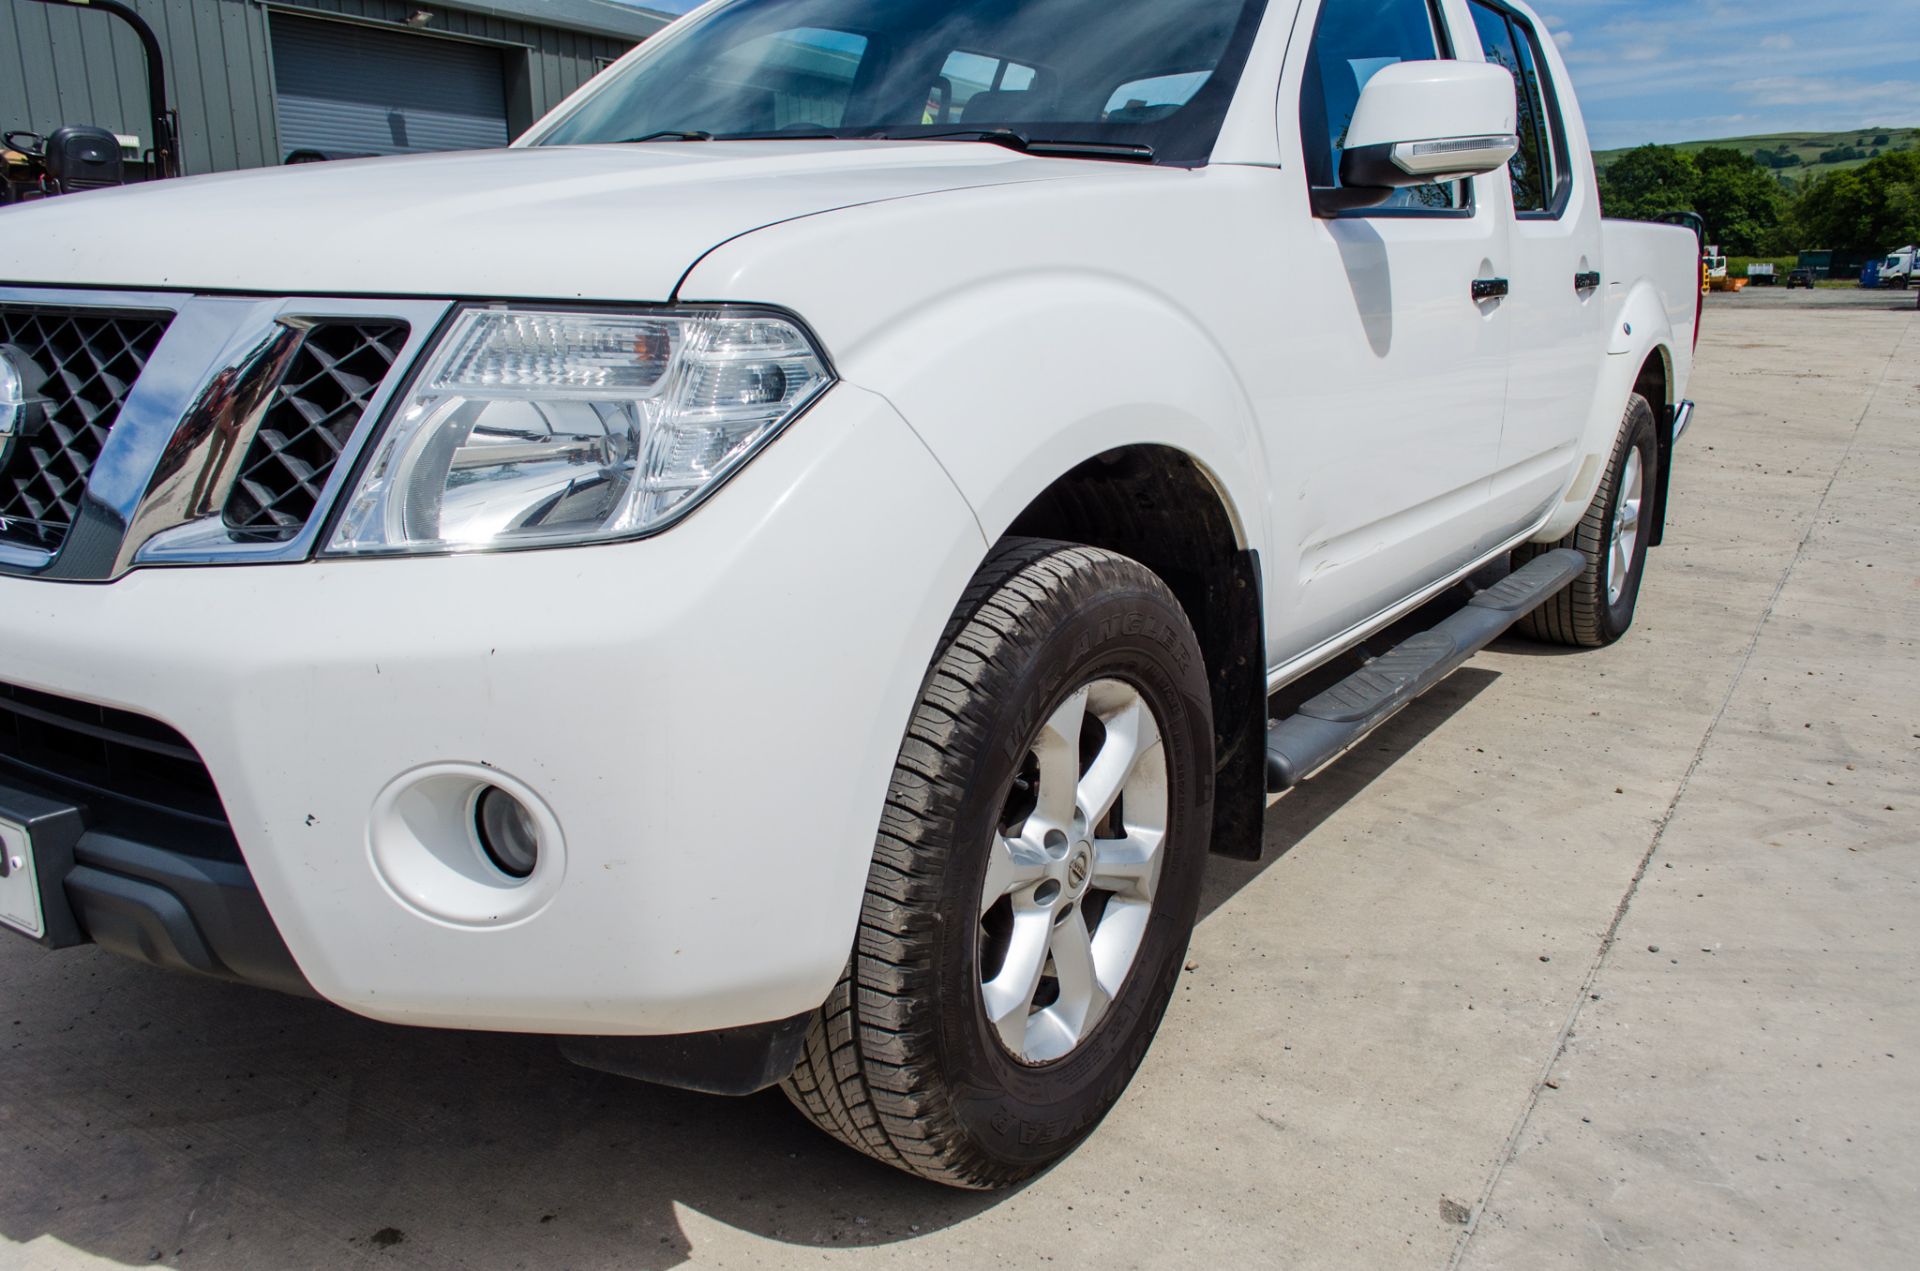 Nissan Navara Acenta DCI 6 speed manual double cab pick up Registration Number: DF63 HPP Date of - Image 9 of 31